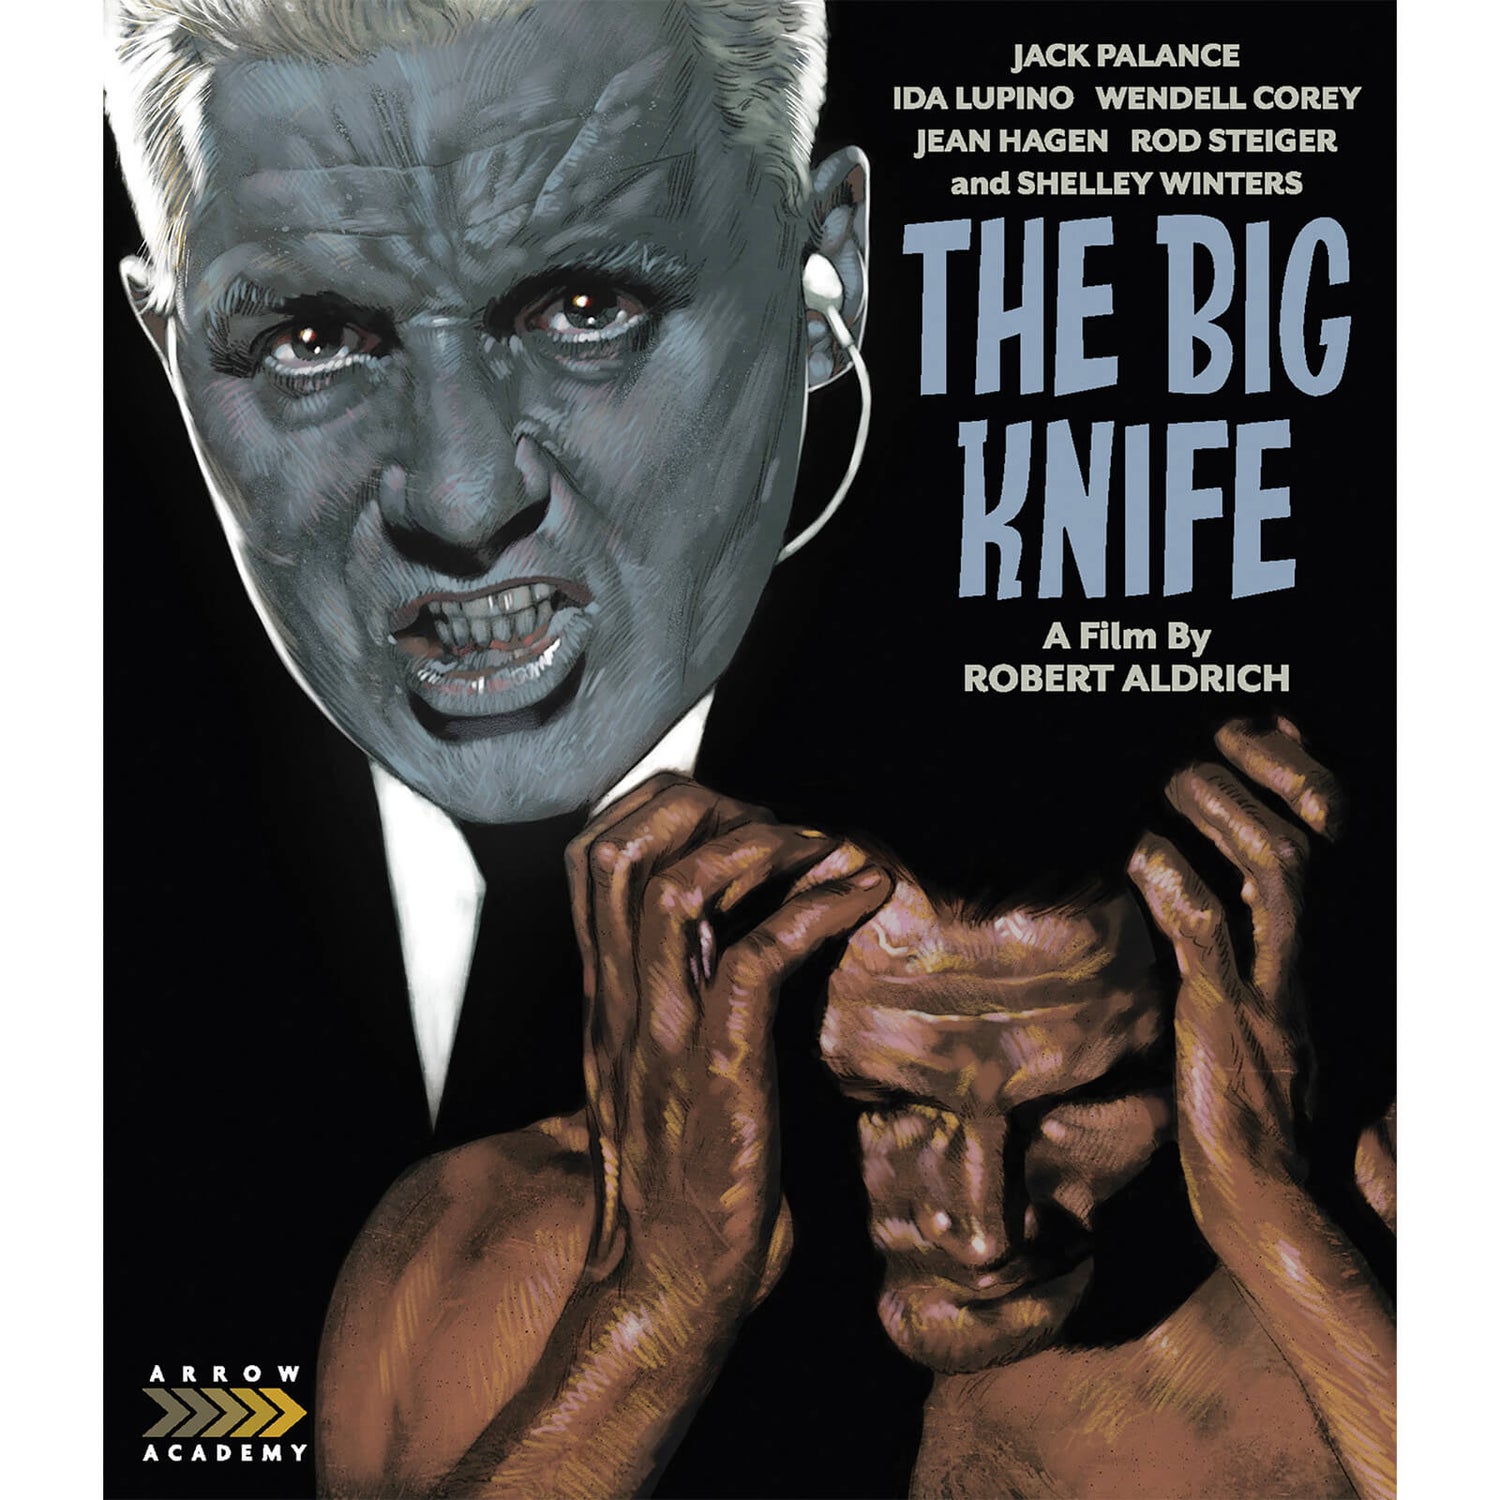 The Big Knife (Includes DVD)